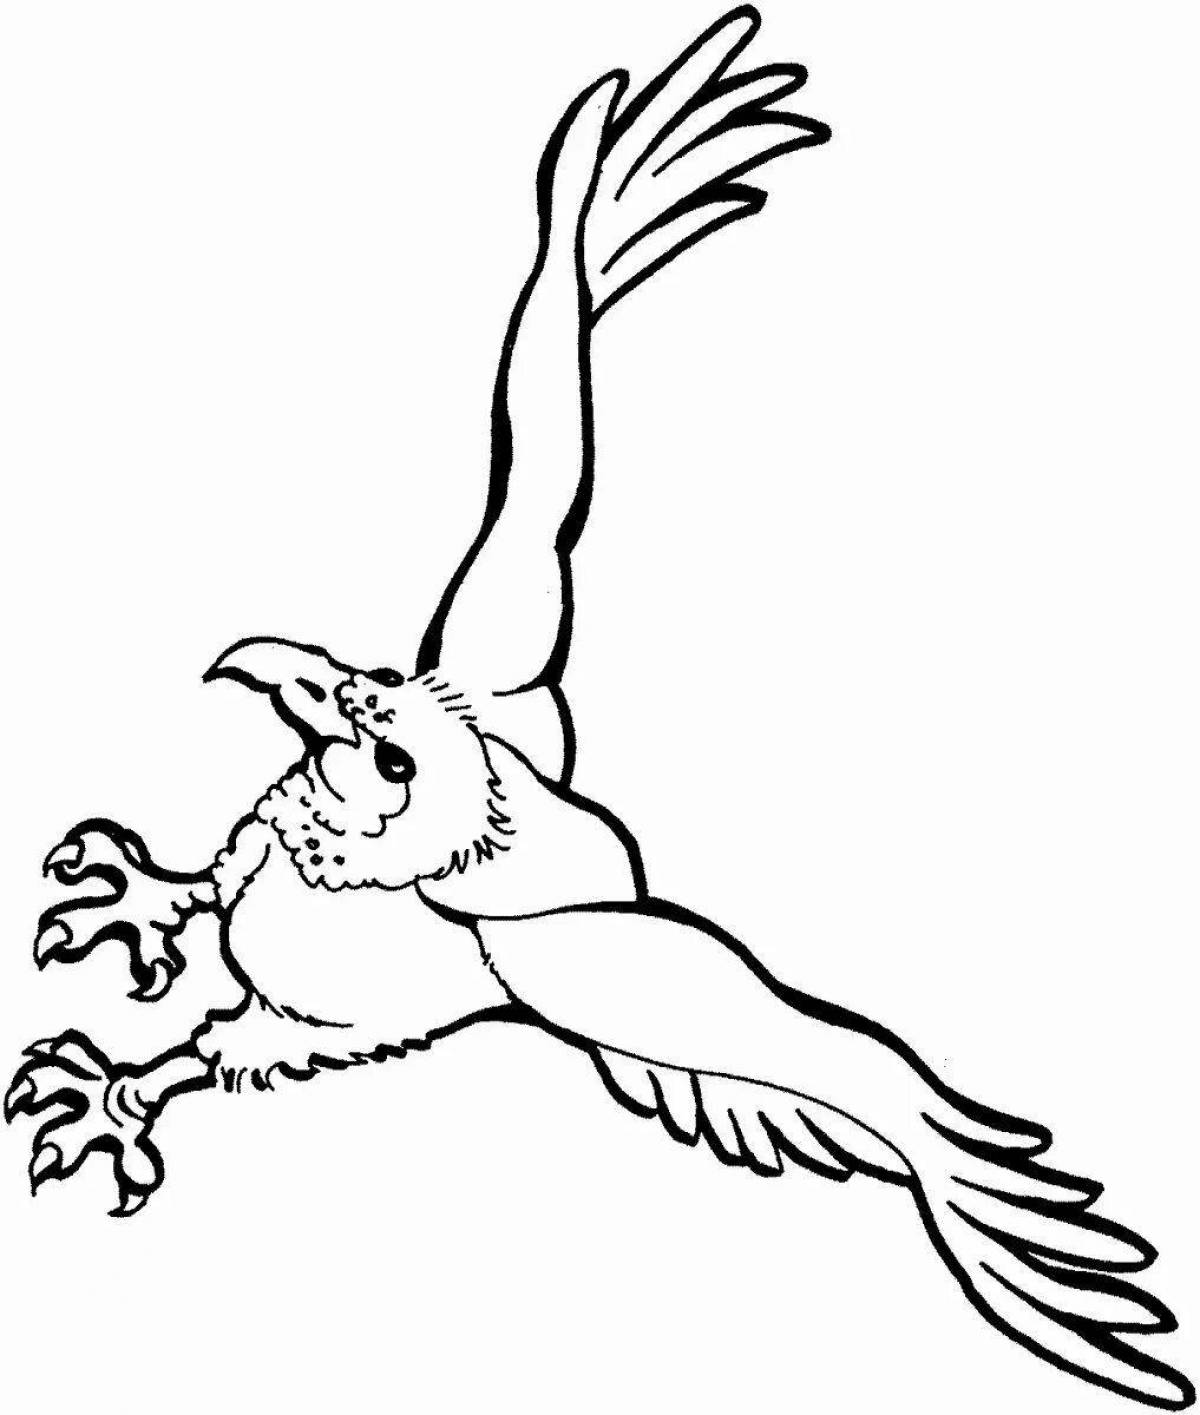 Glowing vulture coloring page